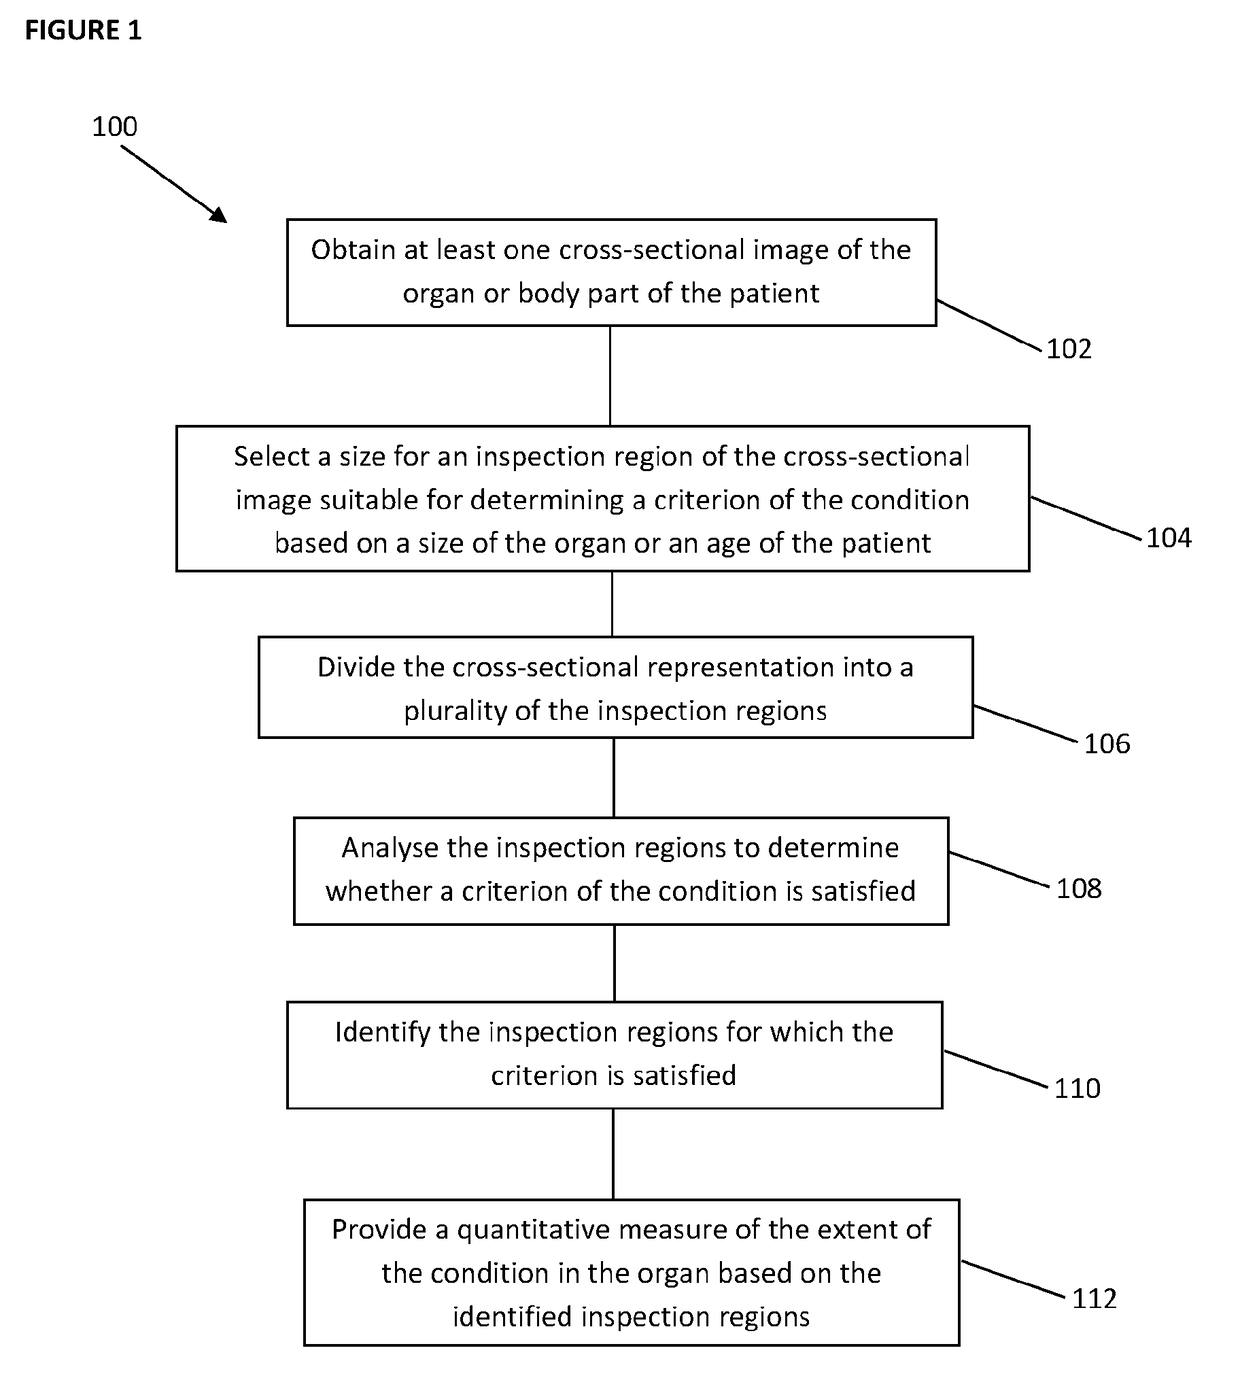 A Method of Analysing an Image for Assessing a Condition of an Organ of a Patient